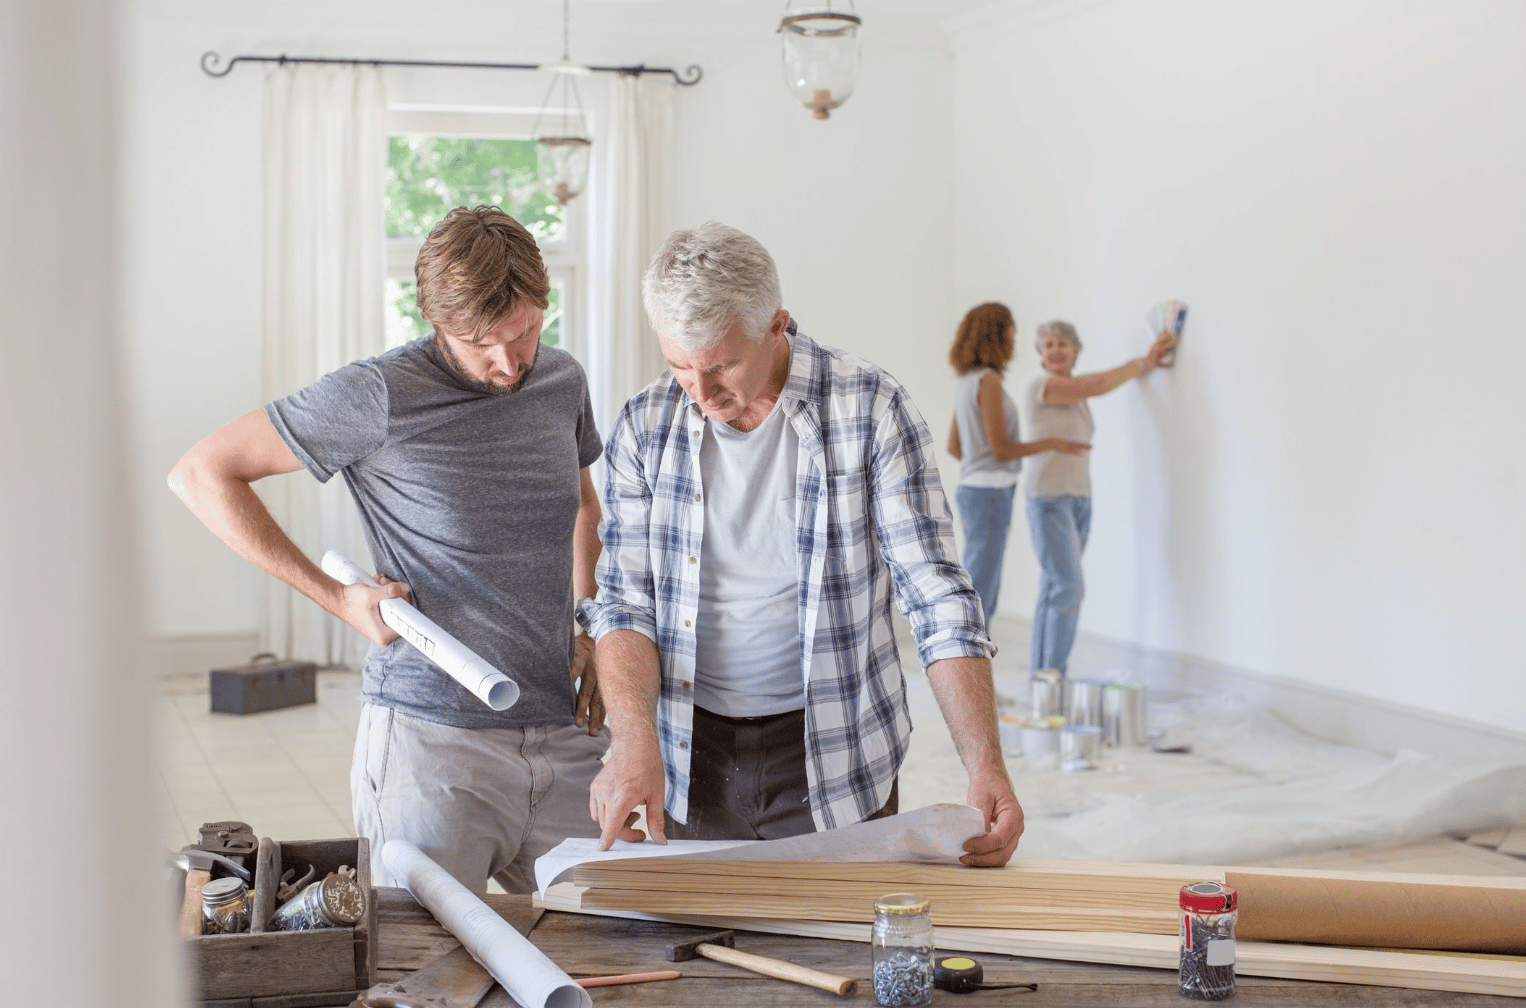 Top 5 Things to Do Before Getting a Renovation